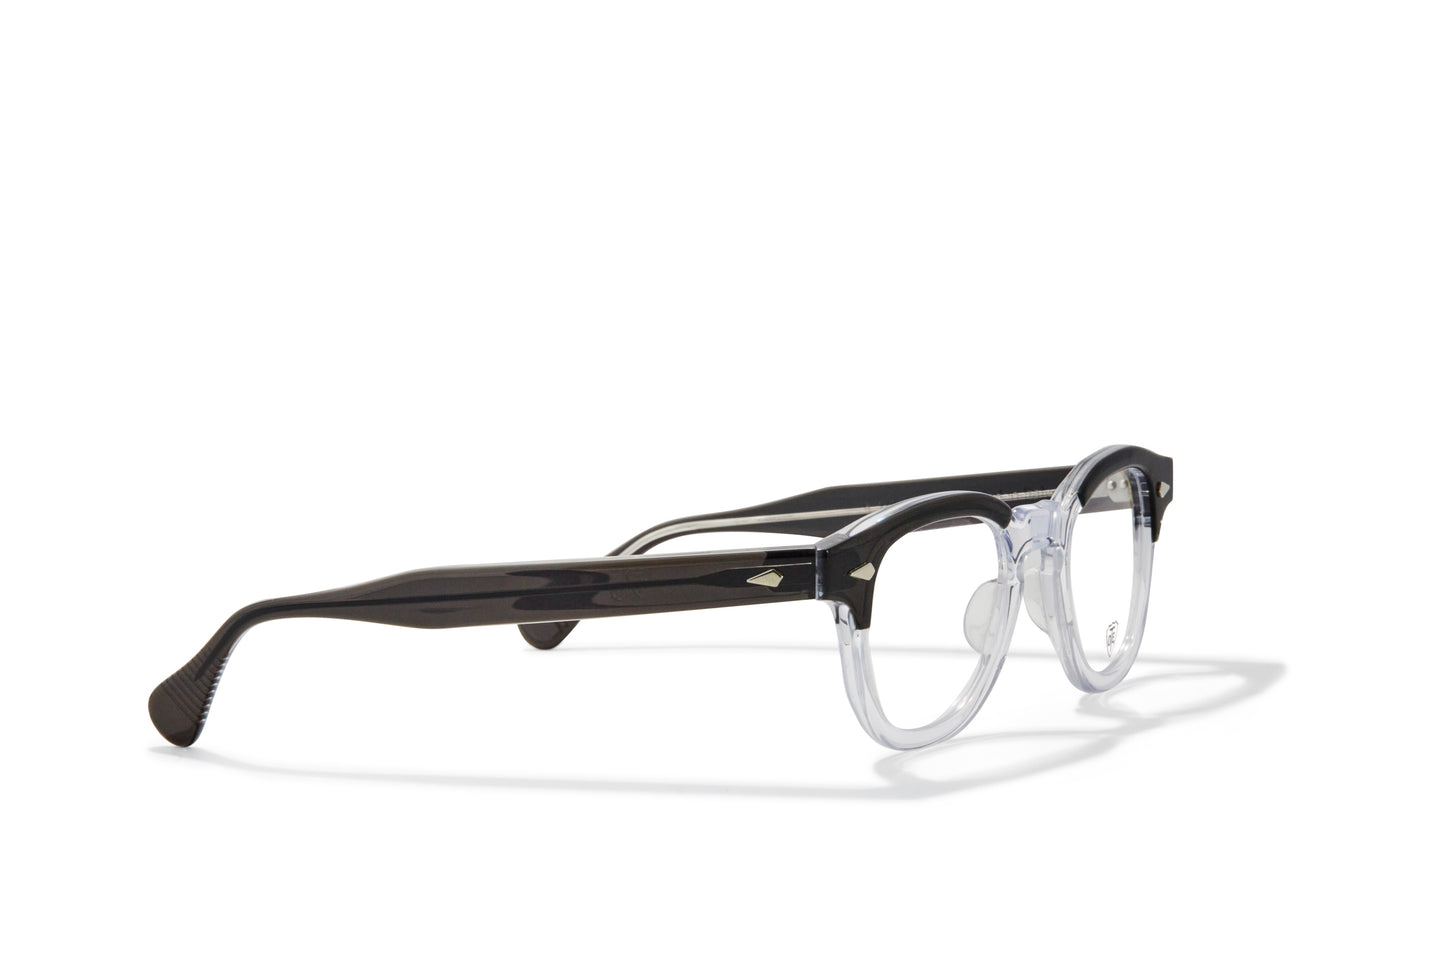 A side view of the smoke grey & clear Arnel Italy frame—the iconic eyeglasses.